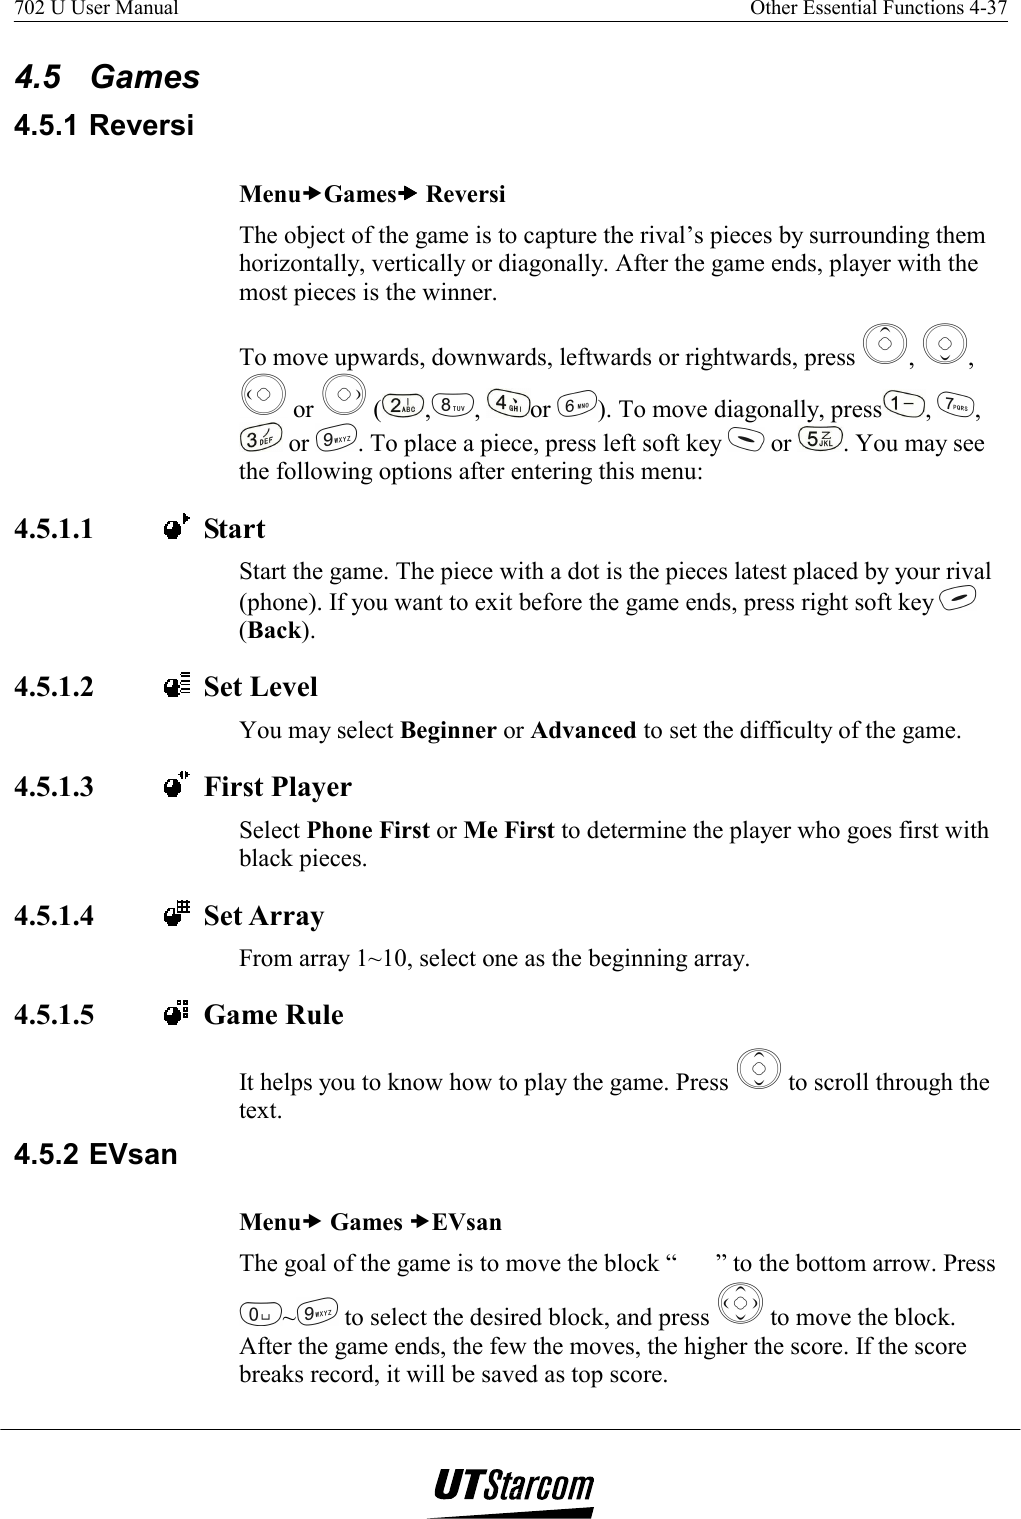 702 U User Manual    Other Essential Functions 4-37   4.5 Games 4.5.1 Reversi MenuxGamesxxxx Reversi The object of the game is to capture the rival’s pieces by surrounding them horizontally, vertically or diagonally. After the game ends, player with the most pieces is the winner. To move upwards, downwards, leftwards or rightwards, press  ,  ,  or   ( , ,  or  ). To move diagonally, press ,  ,  or  . To place a piece, press left soft key   or  . You may see the following options after entering this menu:  4.5.1.1    Start Start the game. The piece with a dot is the pieces latest placed by your rival (phone). If you want to exit before the game ends, press right soft key   (Back). 4.5.1.2    Set Level You may select Beginner or Advanced to set the difficulty of the game. 4.5.1.3    First Player Select Phone First or Me First to determine the player who goes first with black pieces. 4.5.1.4    Set Array From array 1~10, select one as the beginning array. 4.5.1.5    Game Rule It helps you to know how to play the game. Press   to scroll through the text. 4.5.2 EVsan Menux Games xEVsan The goal of the game is to move the block “” to the bottom arrow. Press ~ to select the desired block, and press   to move the block. After the game ends, the few the moves, the higher the score. If the score breaks record, it will be saved as top score. 